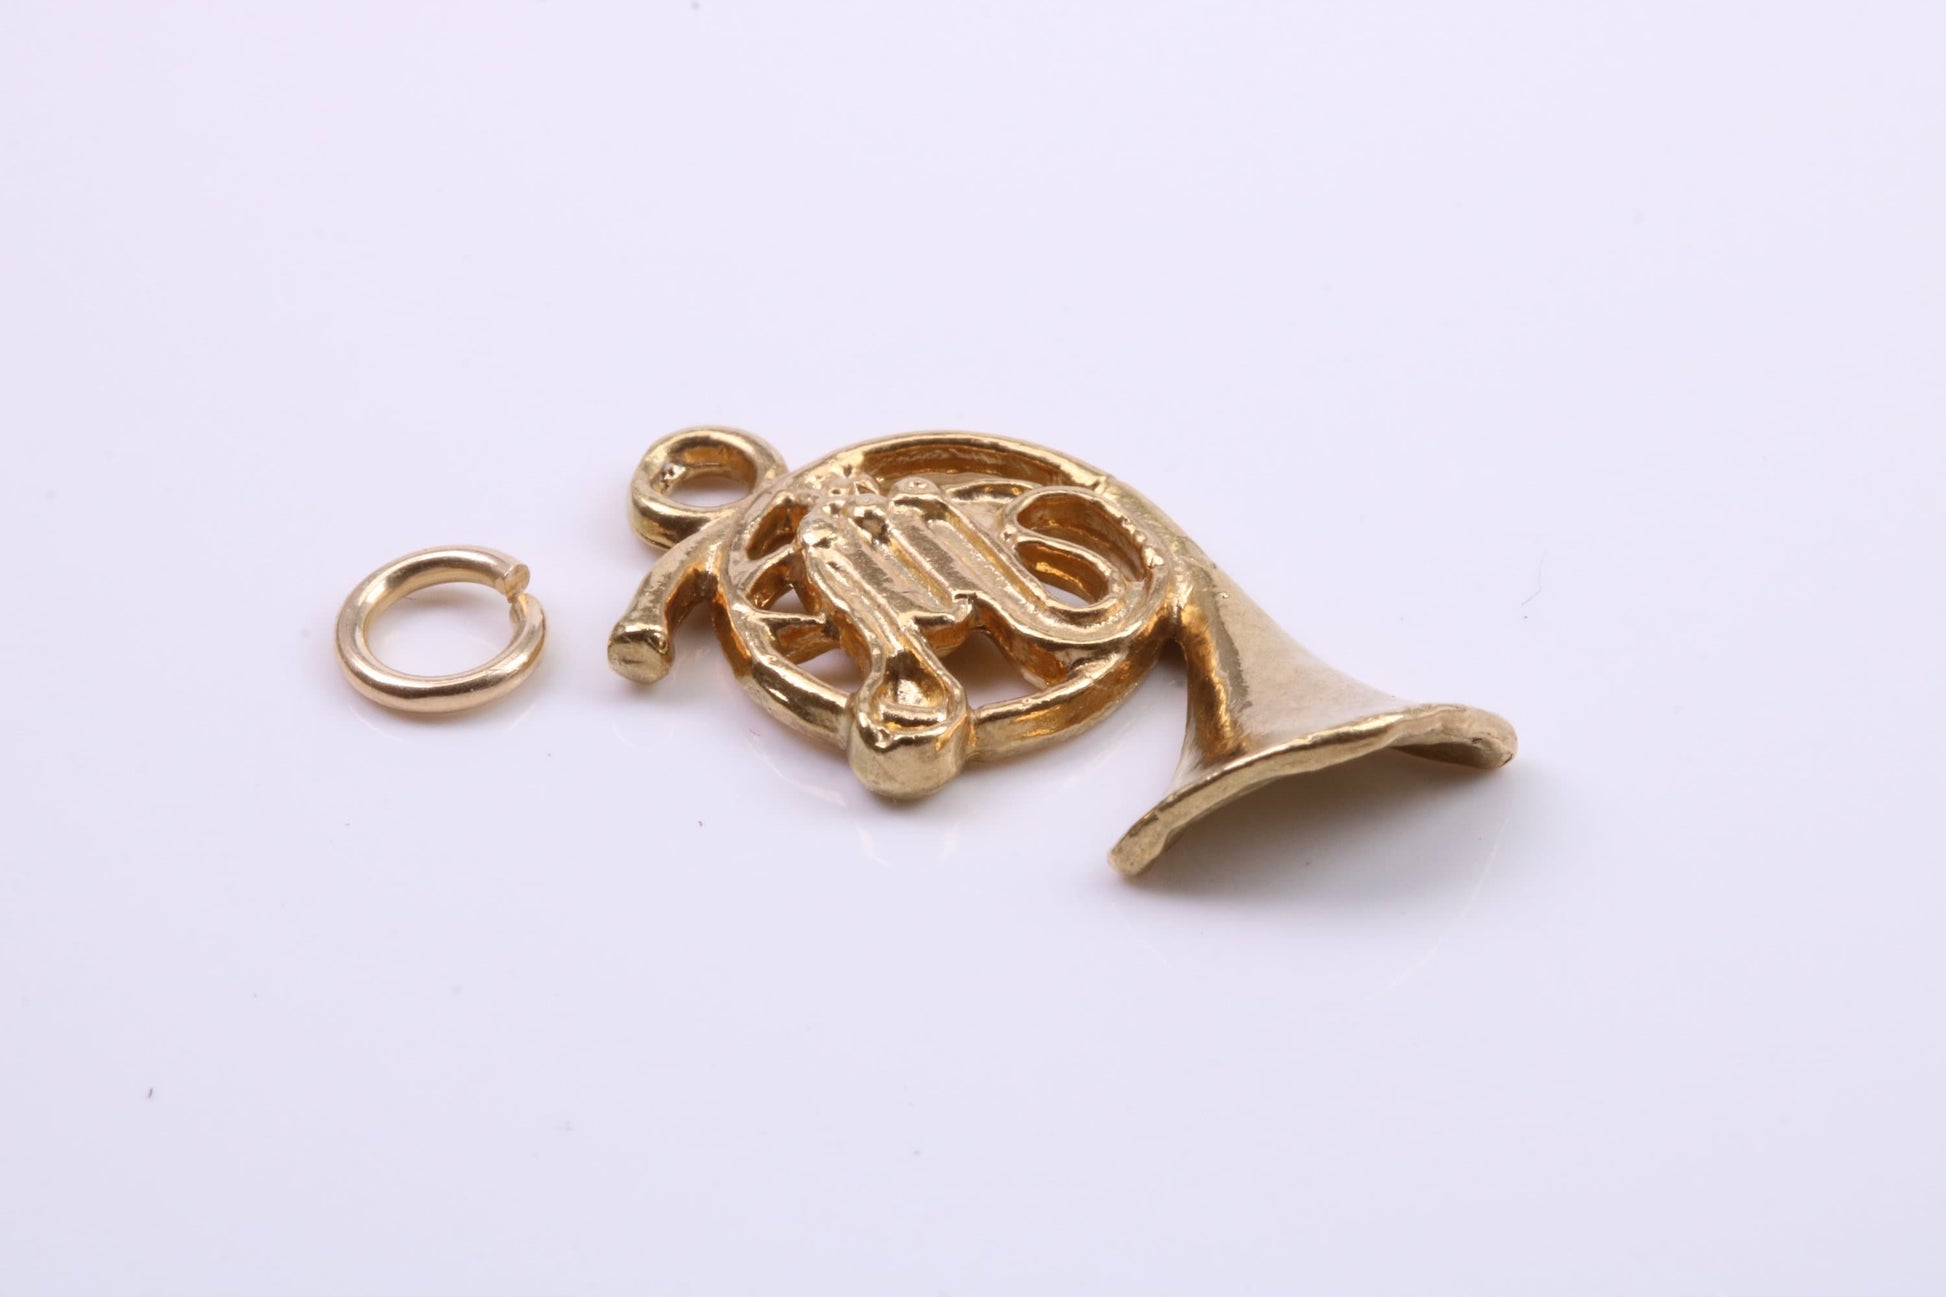 French Horn Charm, Traditional Charm, Made from Solid 9ct Yellow Gold, British Hallmarked, Complete with Attachment Link